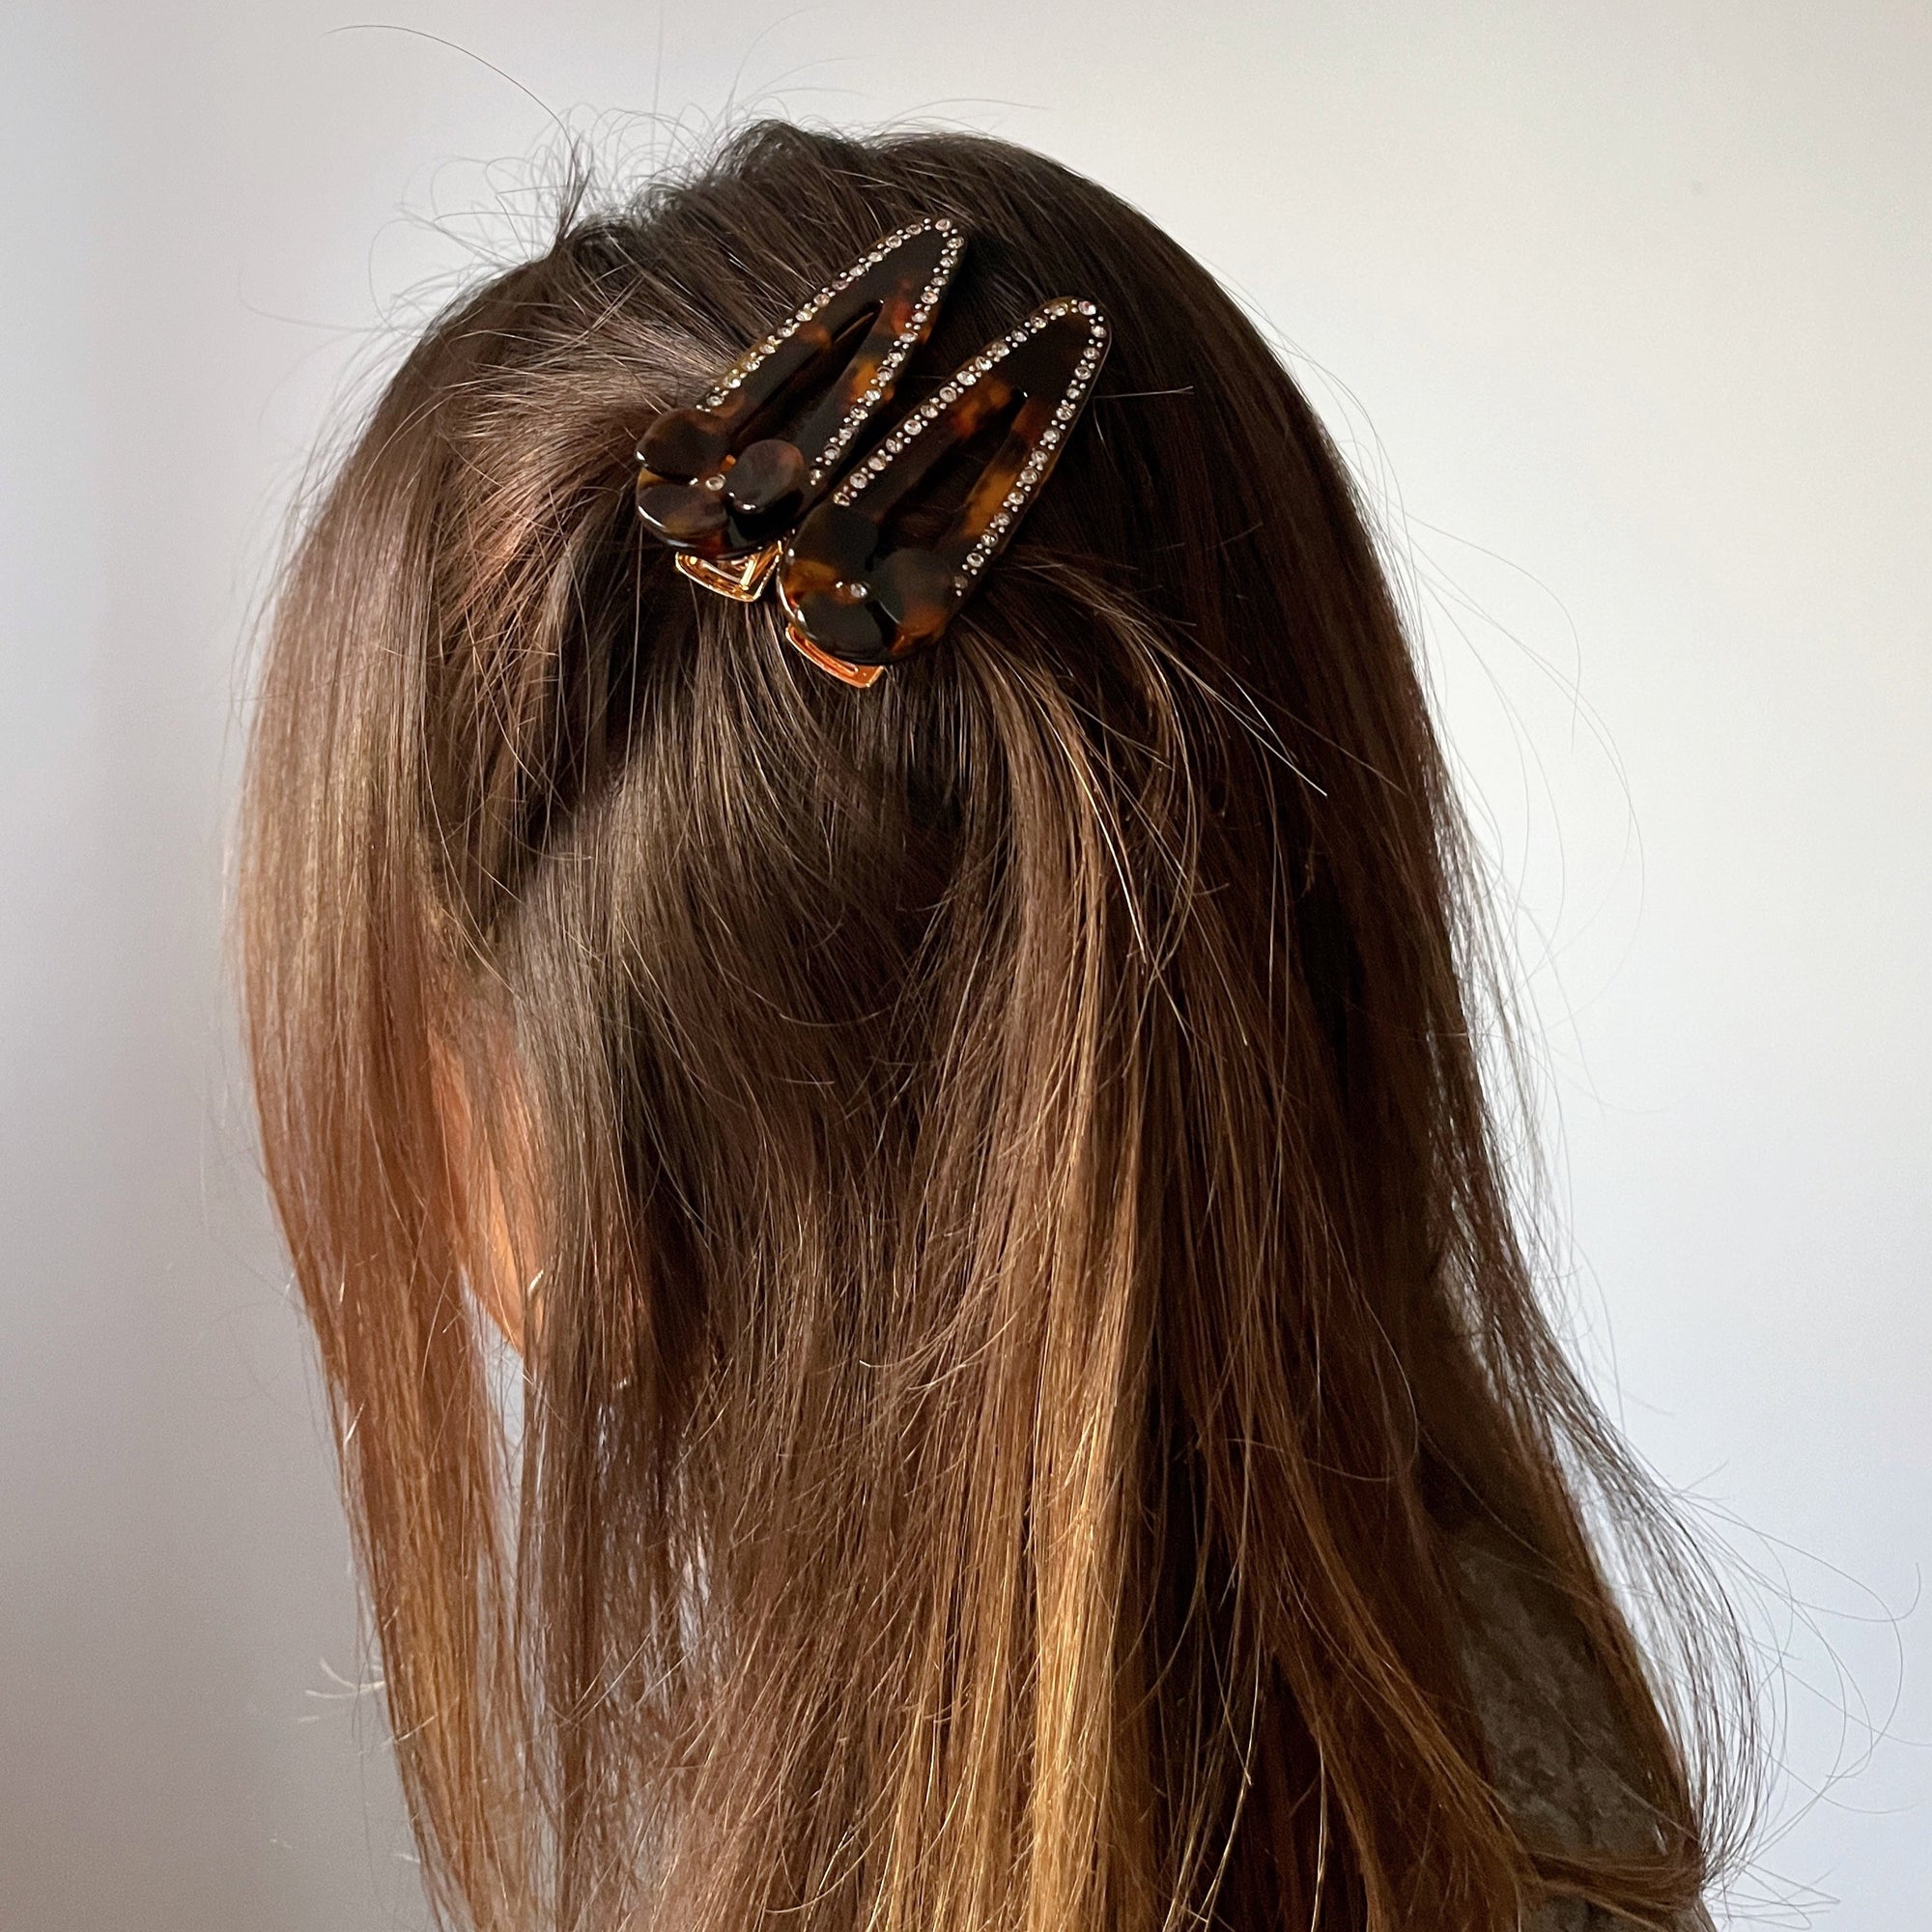 Meet CORA!  Our OG clip, a rounded-edge barrette featuring rhinestones, flower and gold hinge fastening with a teeth effect grip for a sturdy and reliable hold. Great for keeping hair in place or simply clipping back your grown out fringe.  Each clip comes in a branded Tort pouch (colours change seasonally).  Size: 7cm  Colour: classic tortoiseshell with silver rhinestone accents  Material: eco-resin 